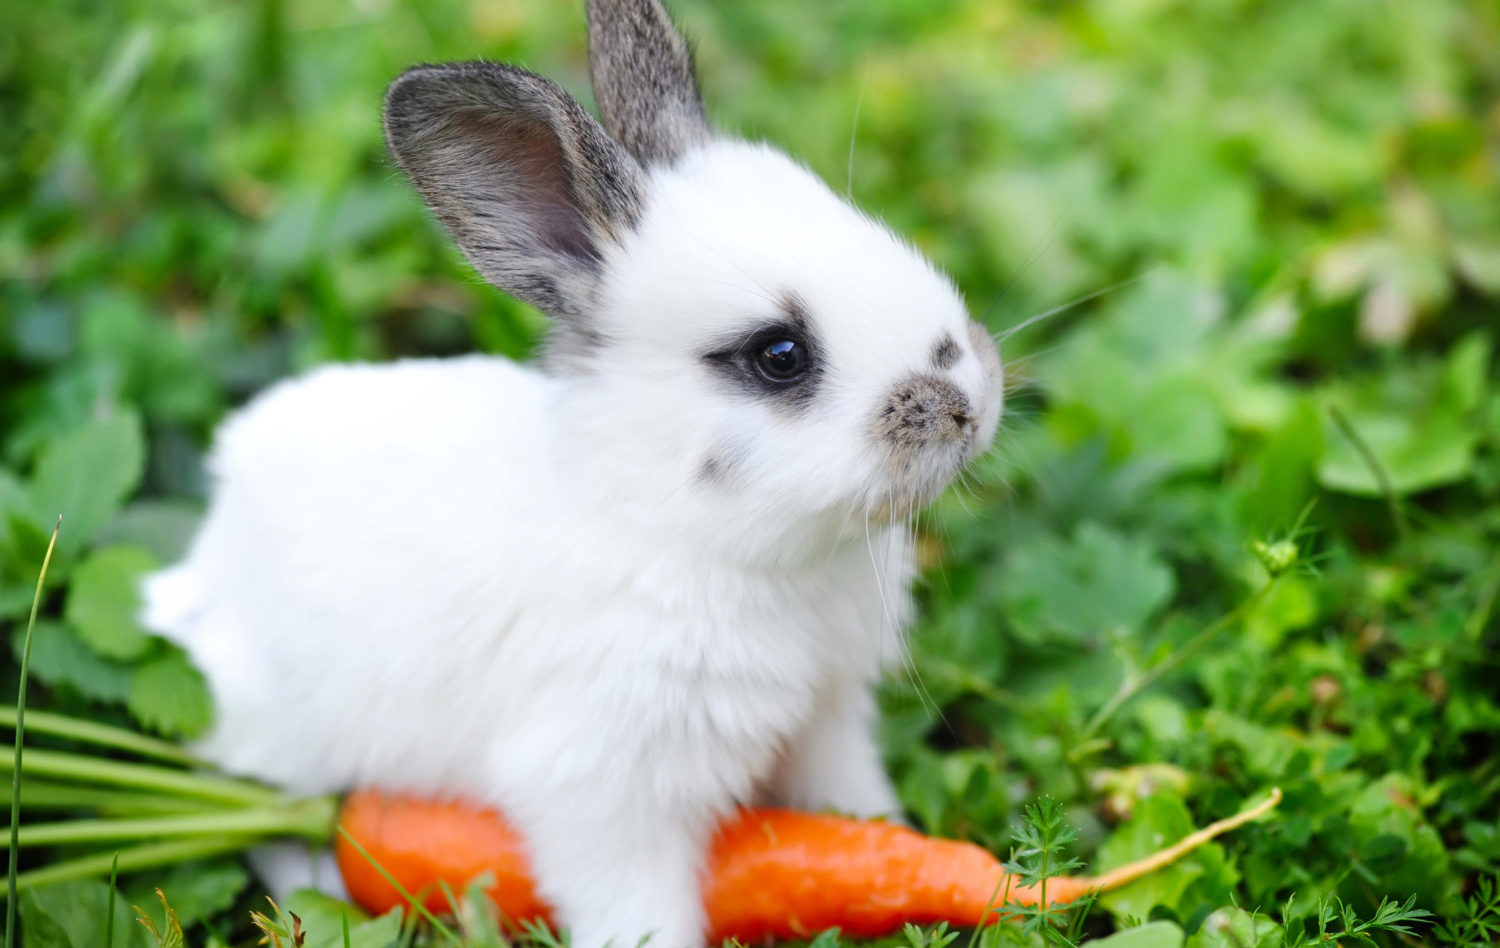 The Adorable Baby Name Of Rabbit That Will Melt Your Heart!